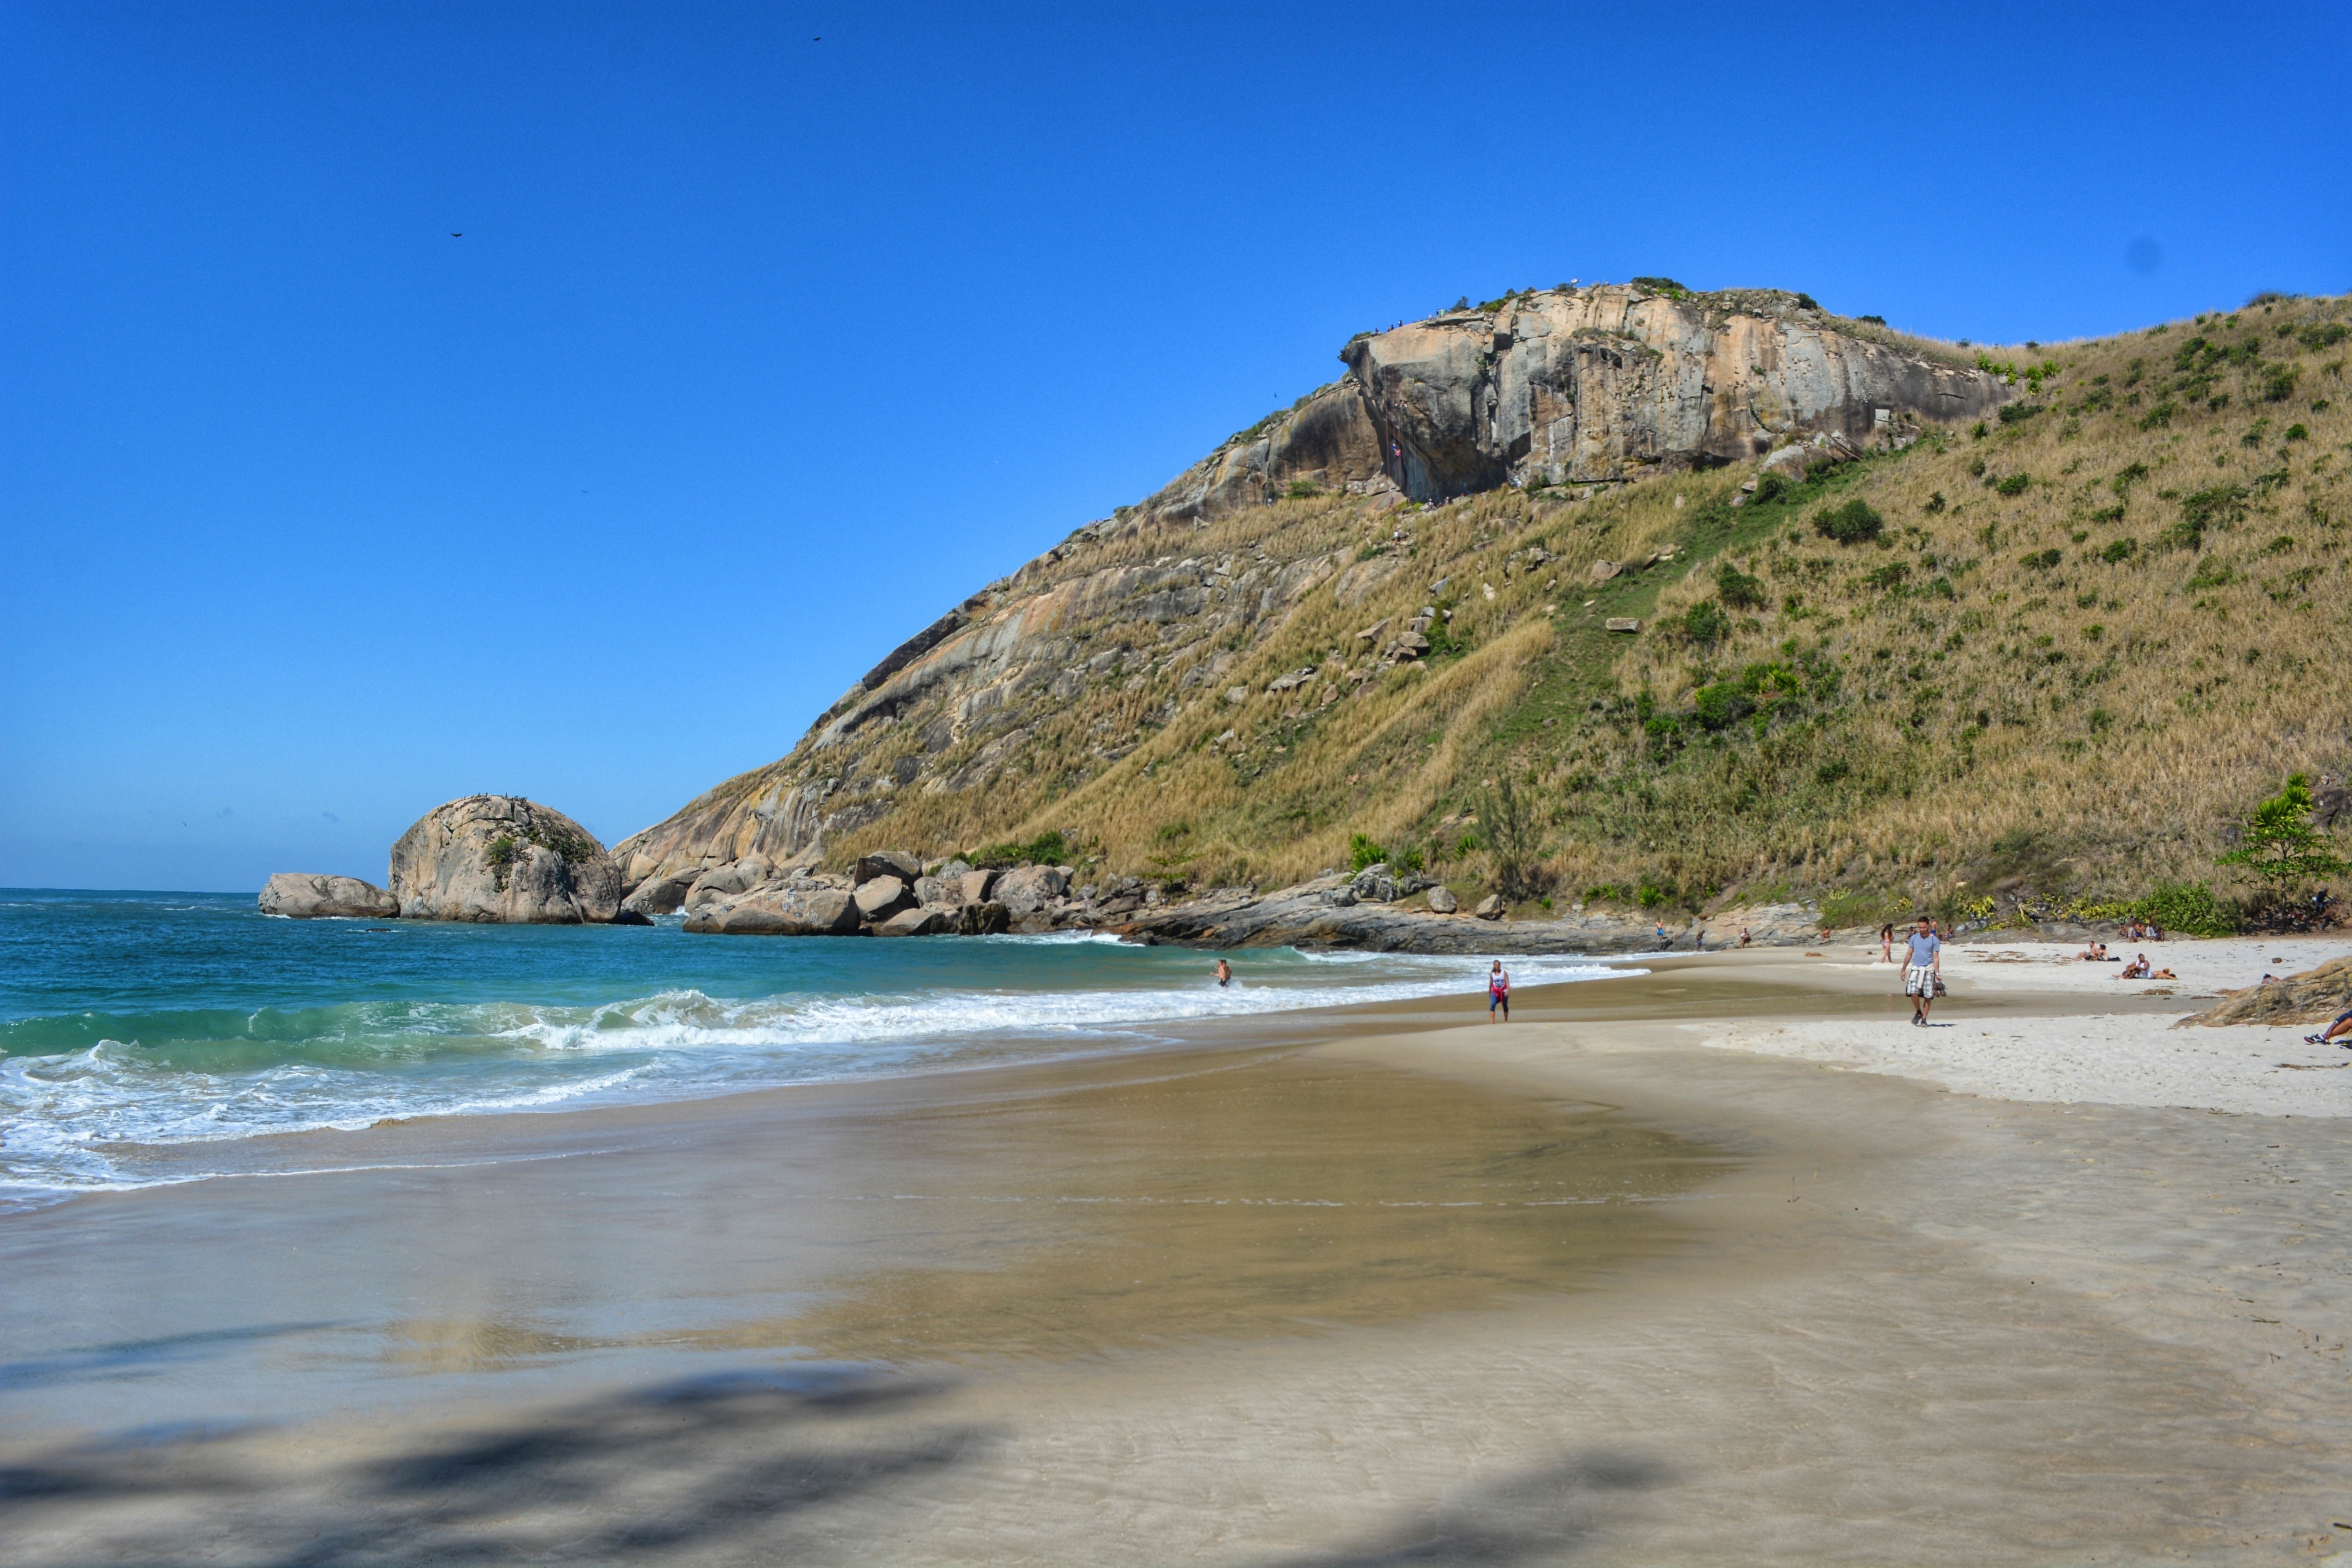 This beach is part of the circuit of wild beaches of Rio de Janeiro. One can only arrive at this beach through trails or through the sea.